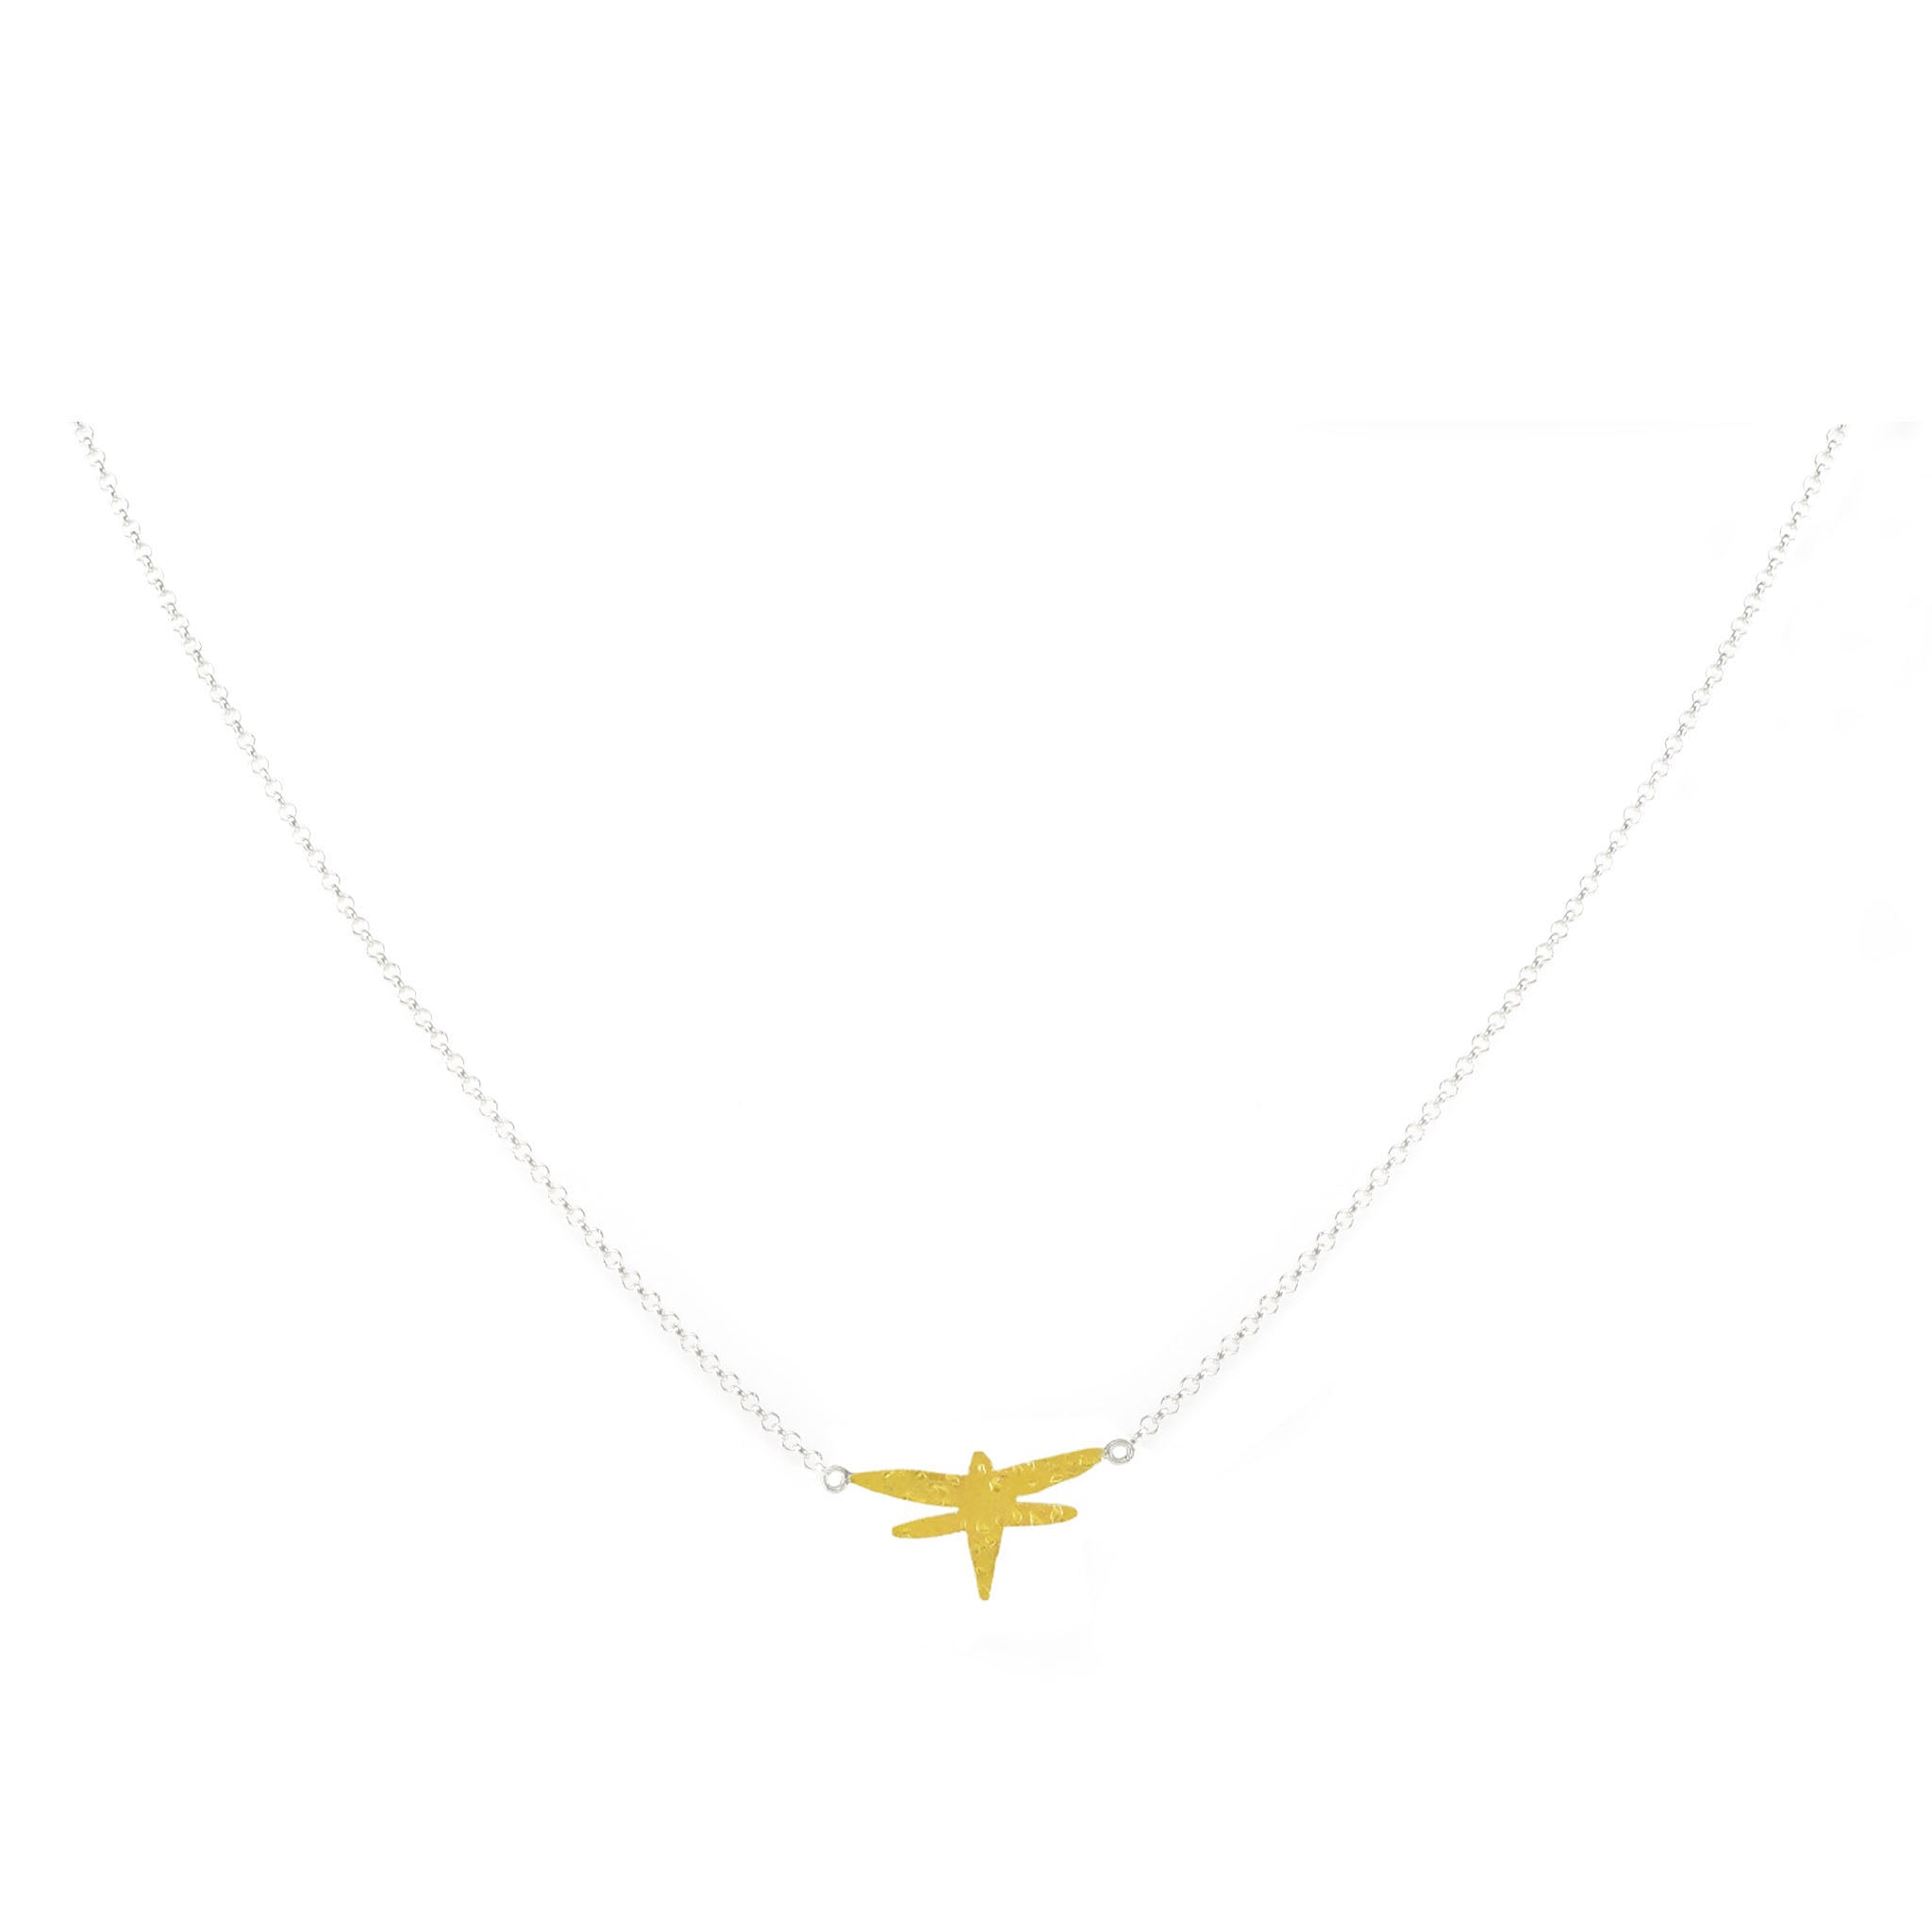 mini gold dragonfly necklace by maria blondet